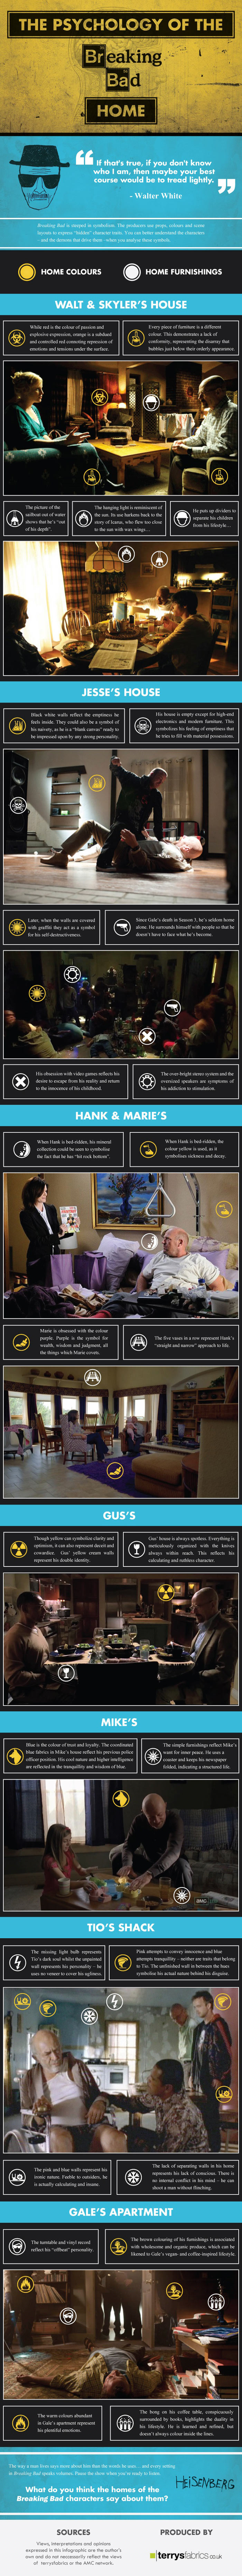 Homes of Breaking Bad-Infographic